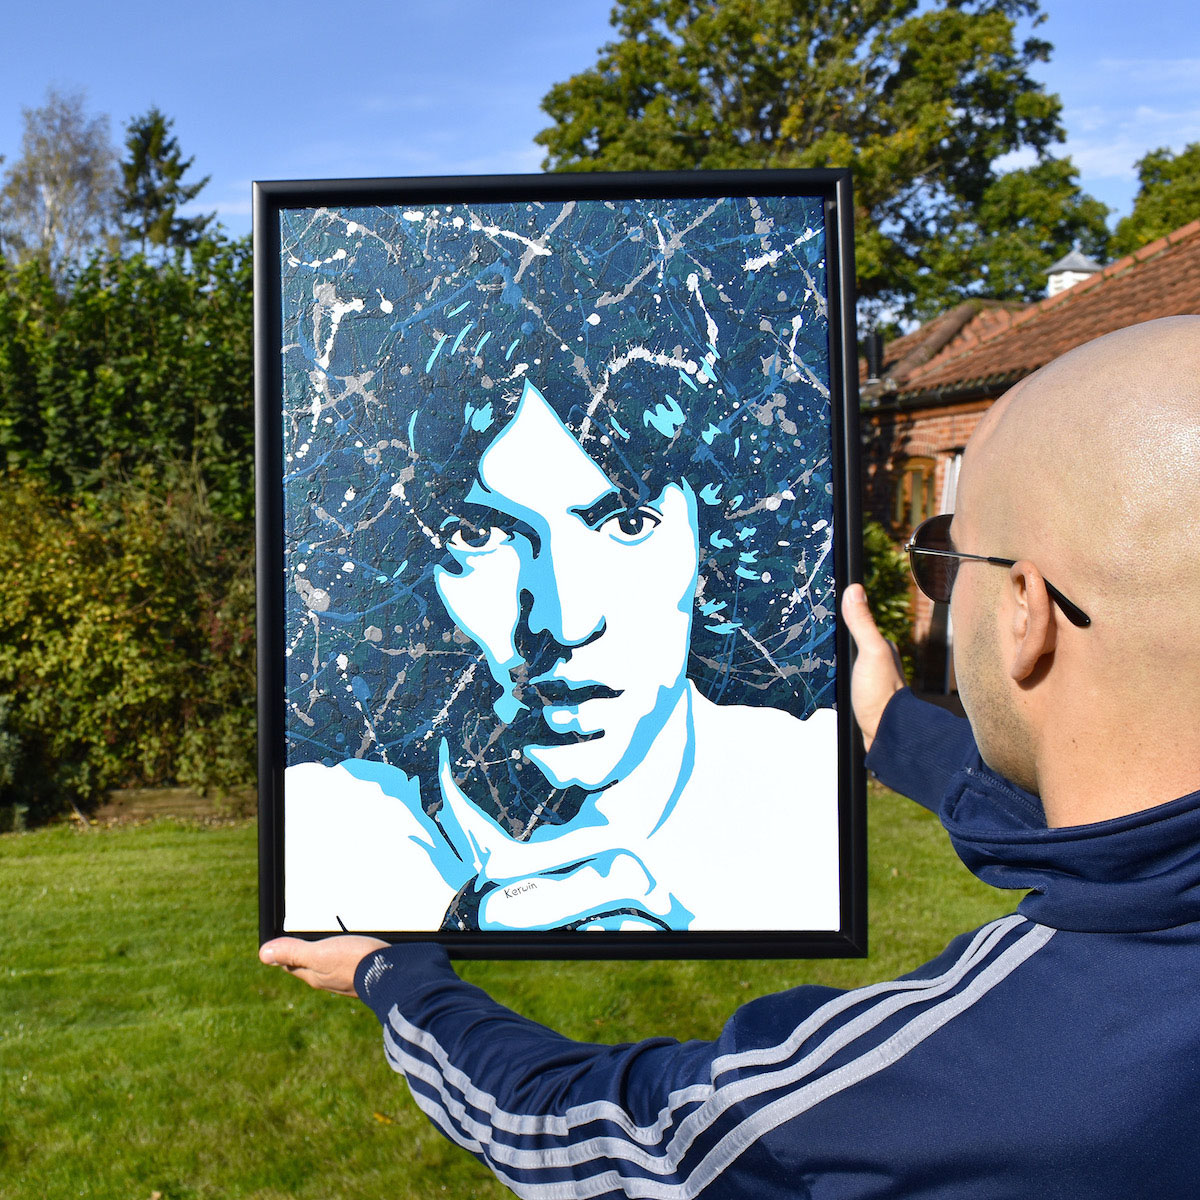 The Verve Richard Ashcroft painting By Kerwin